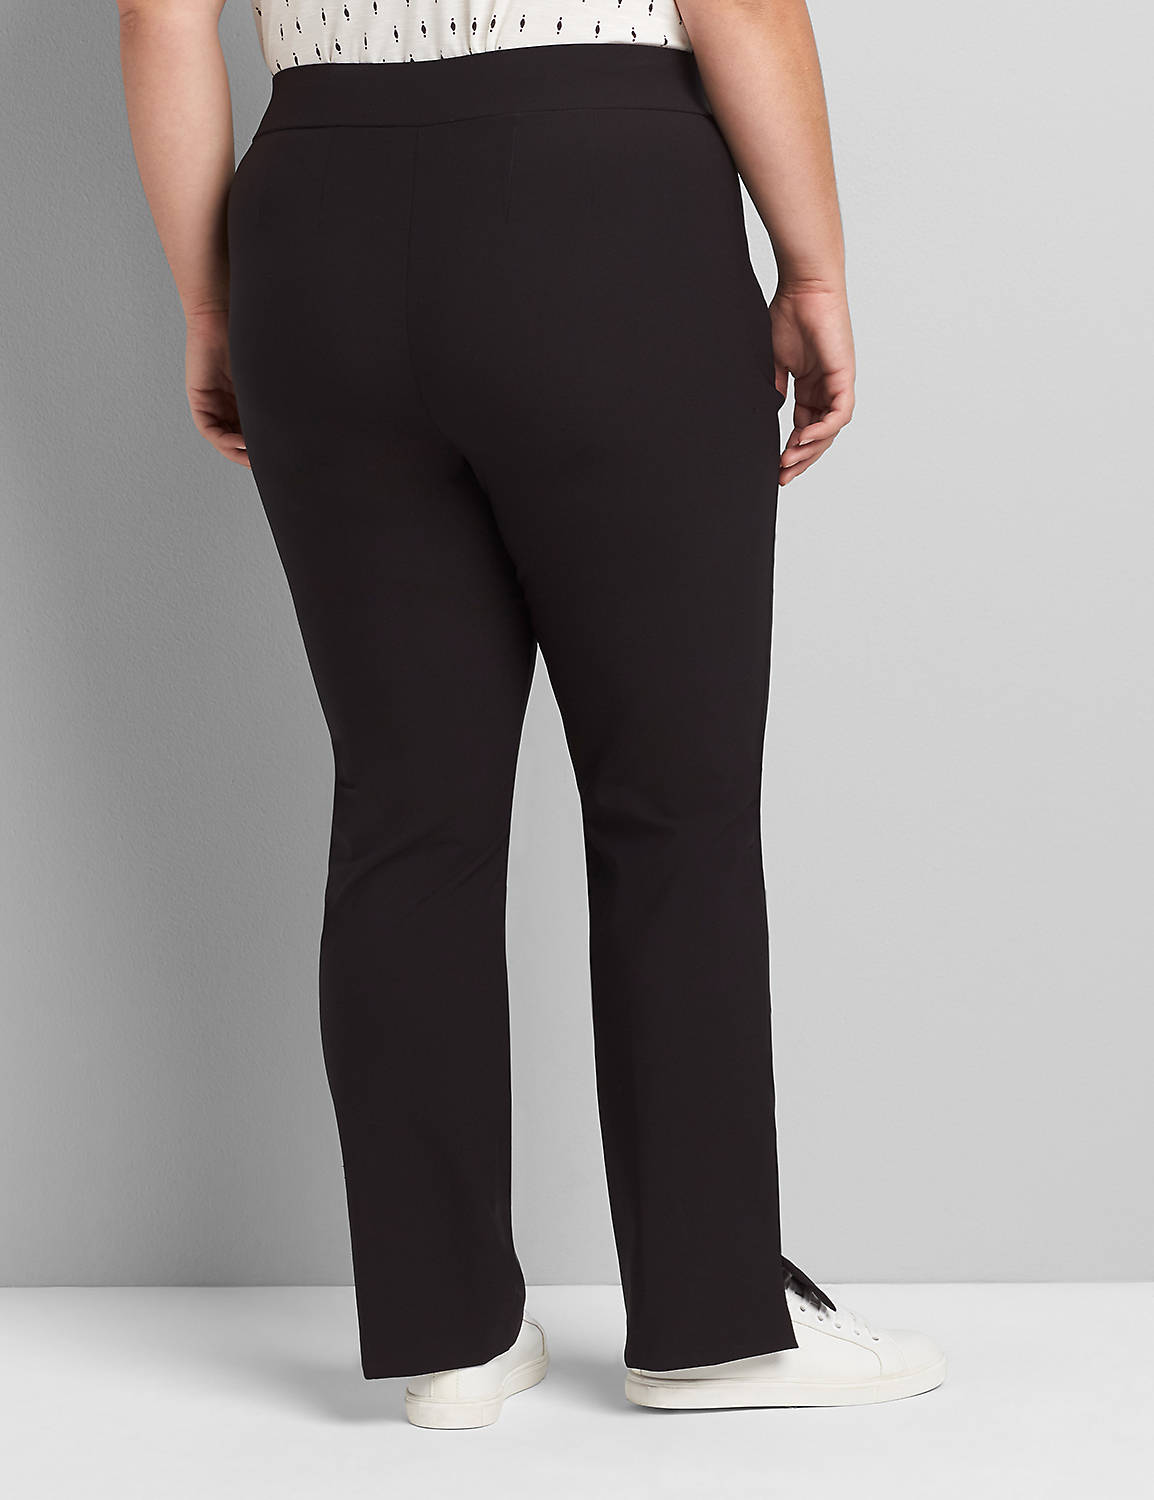 On-The-Go Straight Pant 1114355:Pitch Black LB 1000322:14 Product Image 2